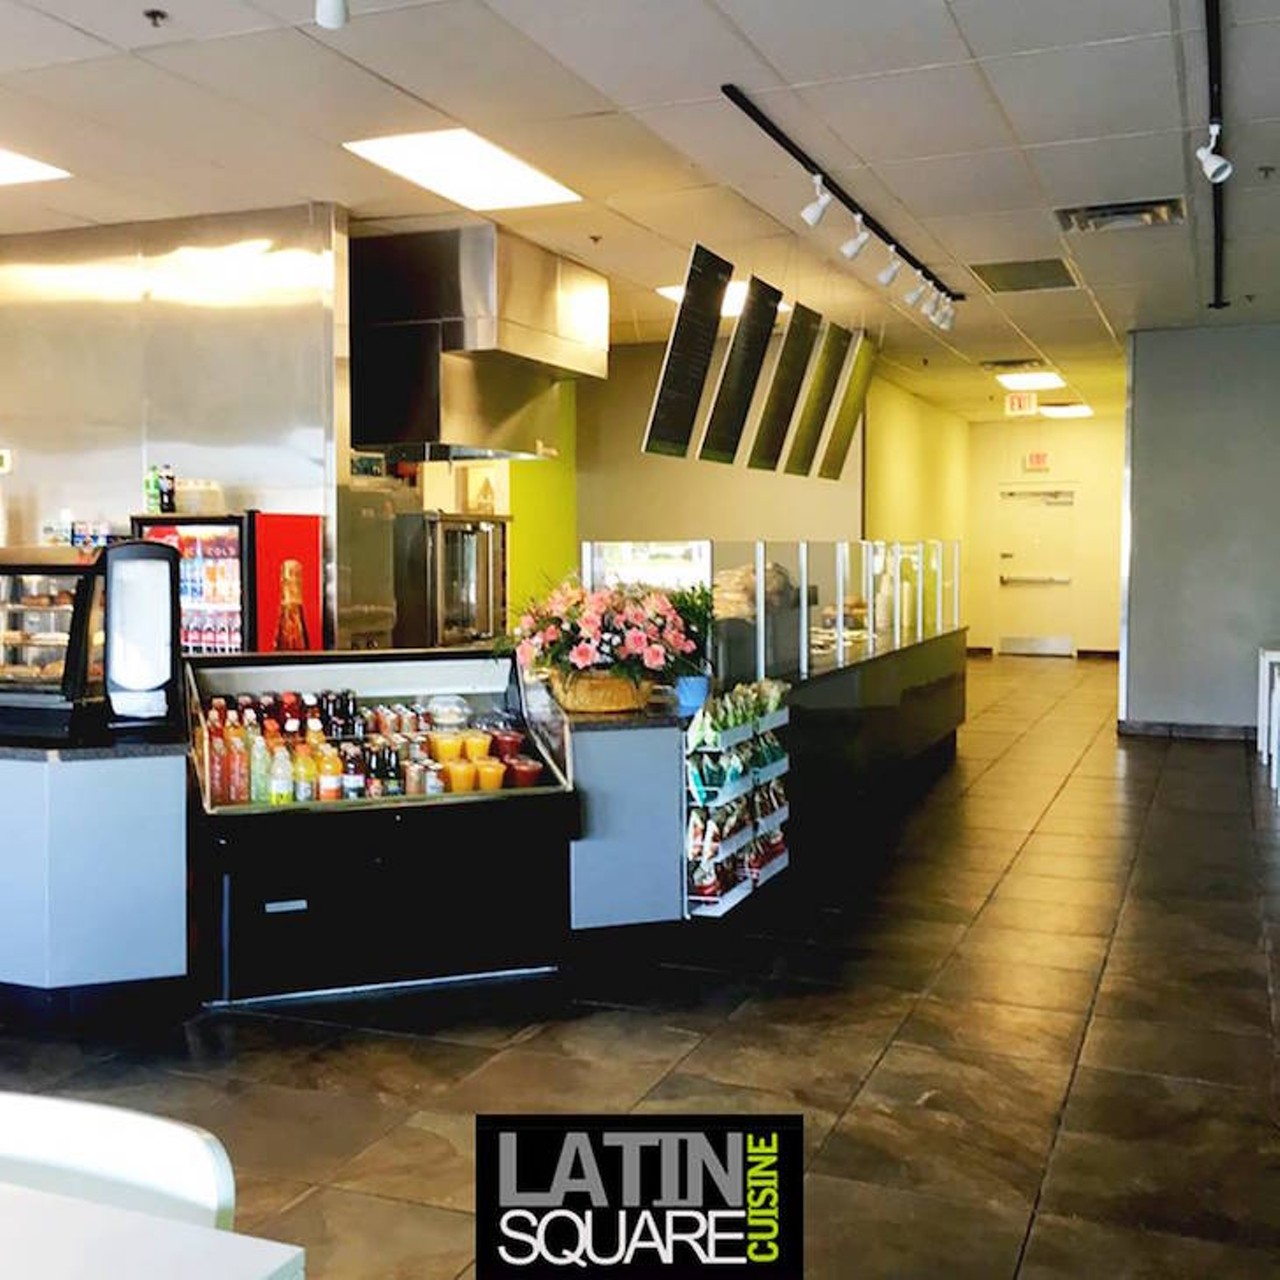  Latin Square
250 S Orange Ave, Orlando, (407)-608-4181
If you&#146;re looking to start off your day with a little spice, this tiny Latin restaurant located in the heart of Downtown Orlando will help you kick up the heat with some breakfast burritos and homemade chimichurri sauce.
Photo via Latin Square/Facebook